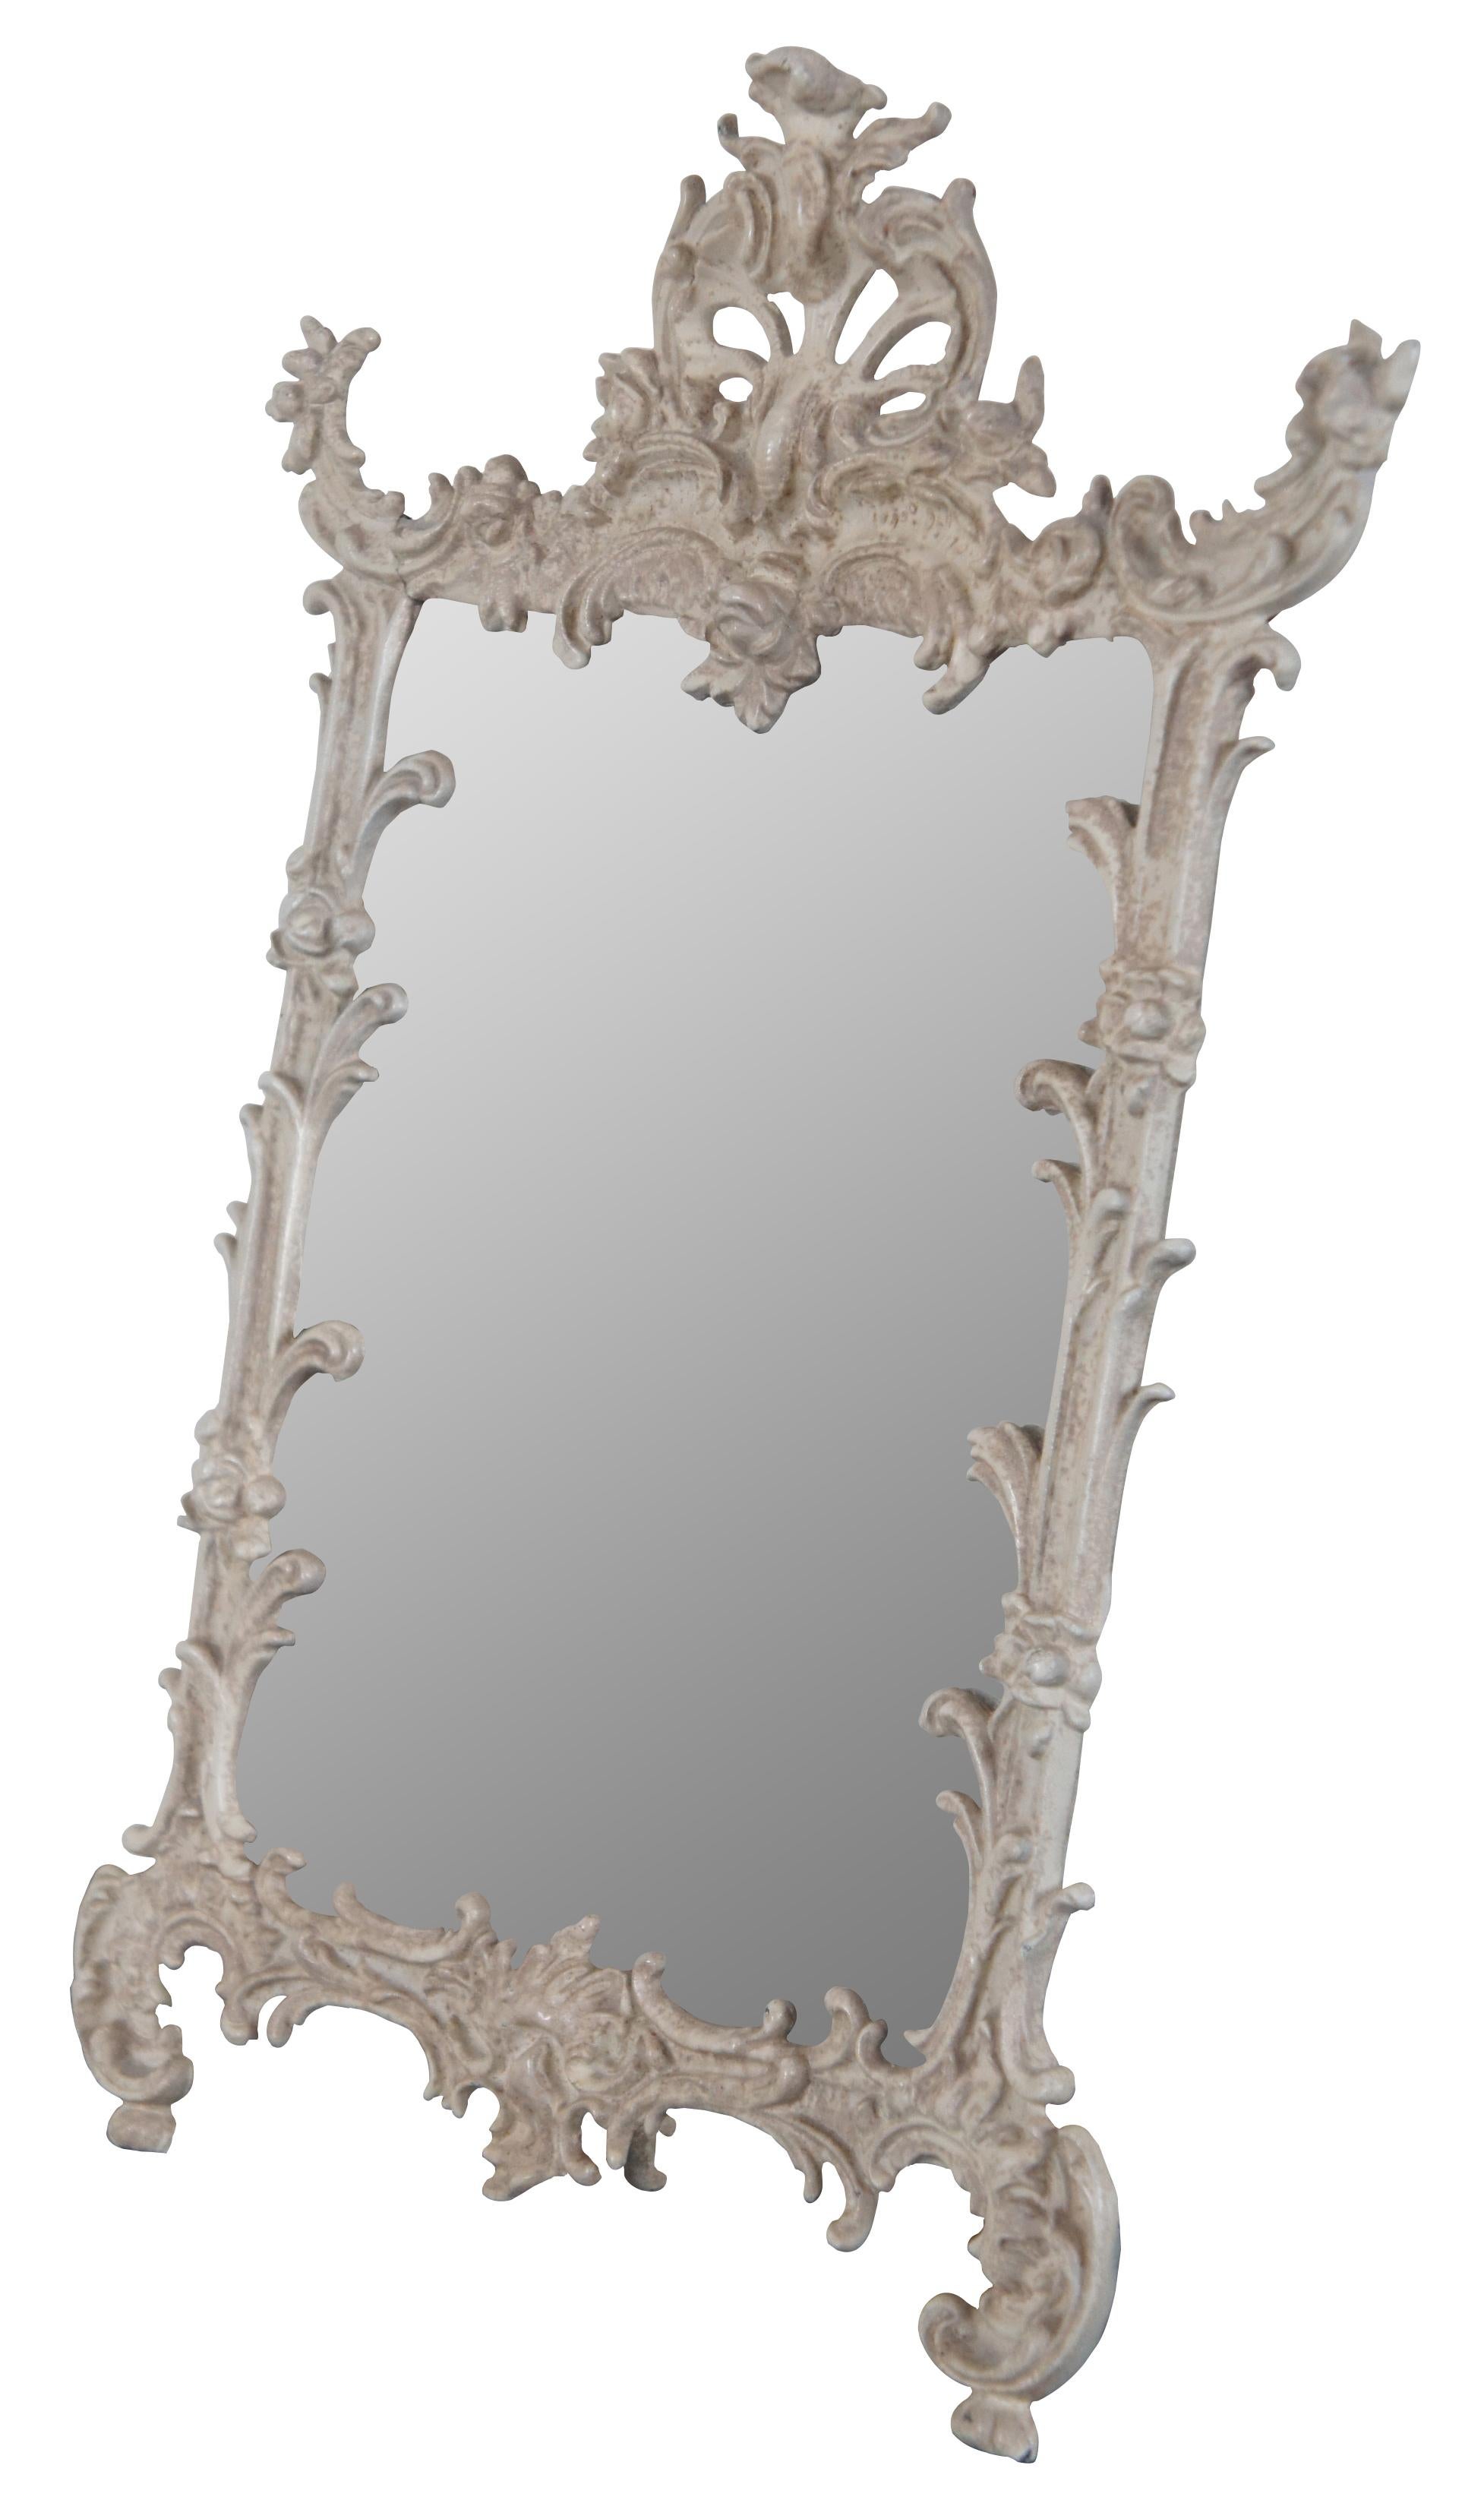 Antique easel style cast iron table top mirror, finished in white with ornate Baroque styling, marked “669 JM-38 Iron Art” on the reverse.

Measures: 9.75” x 3.75” x 15” / mirror - 6.75” x 9.25” (width x depth x height).